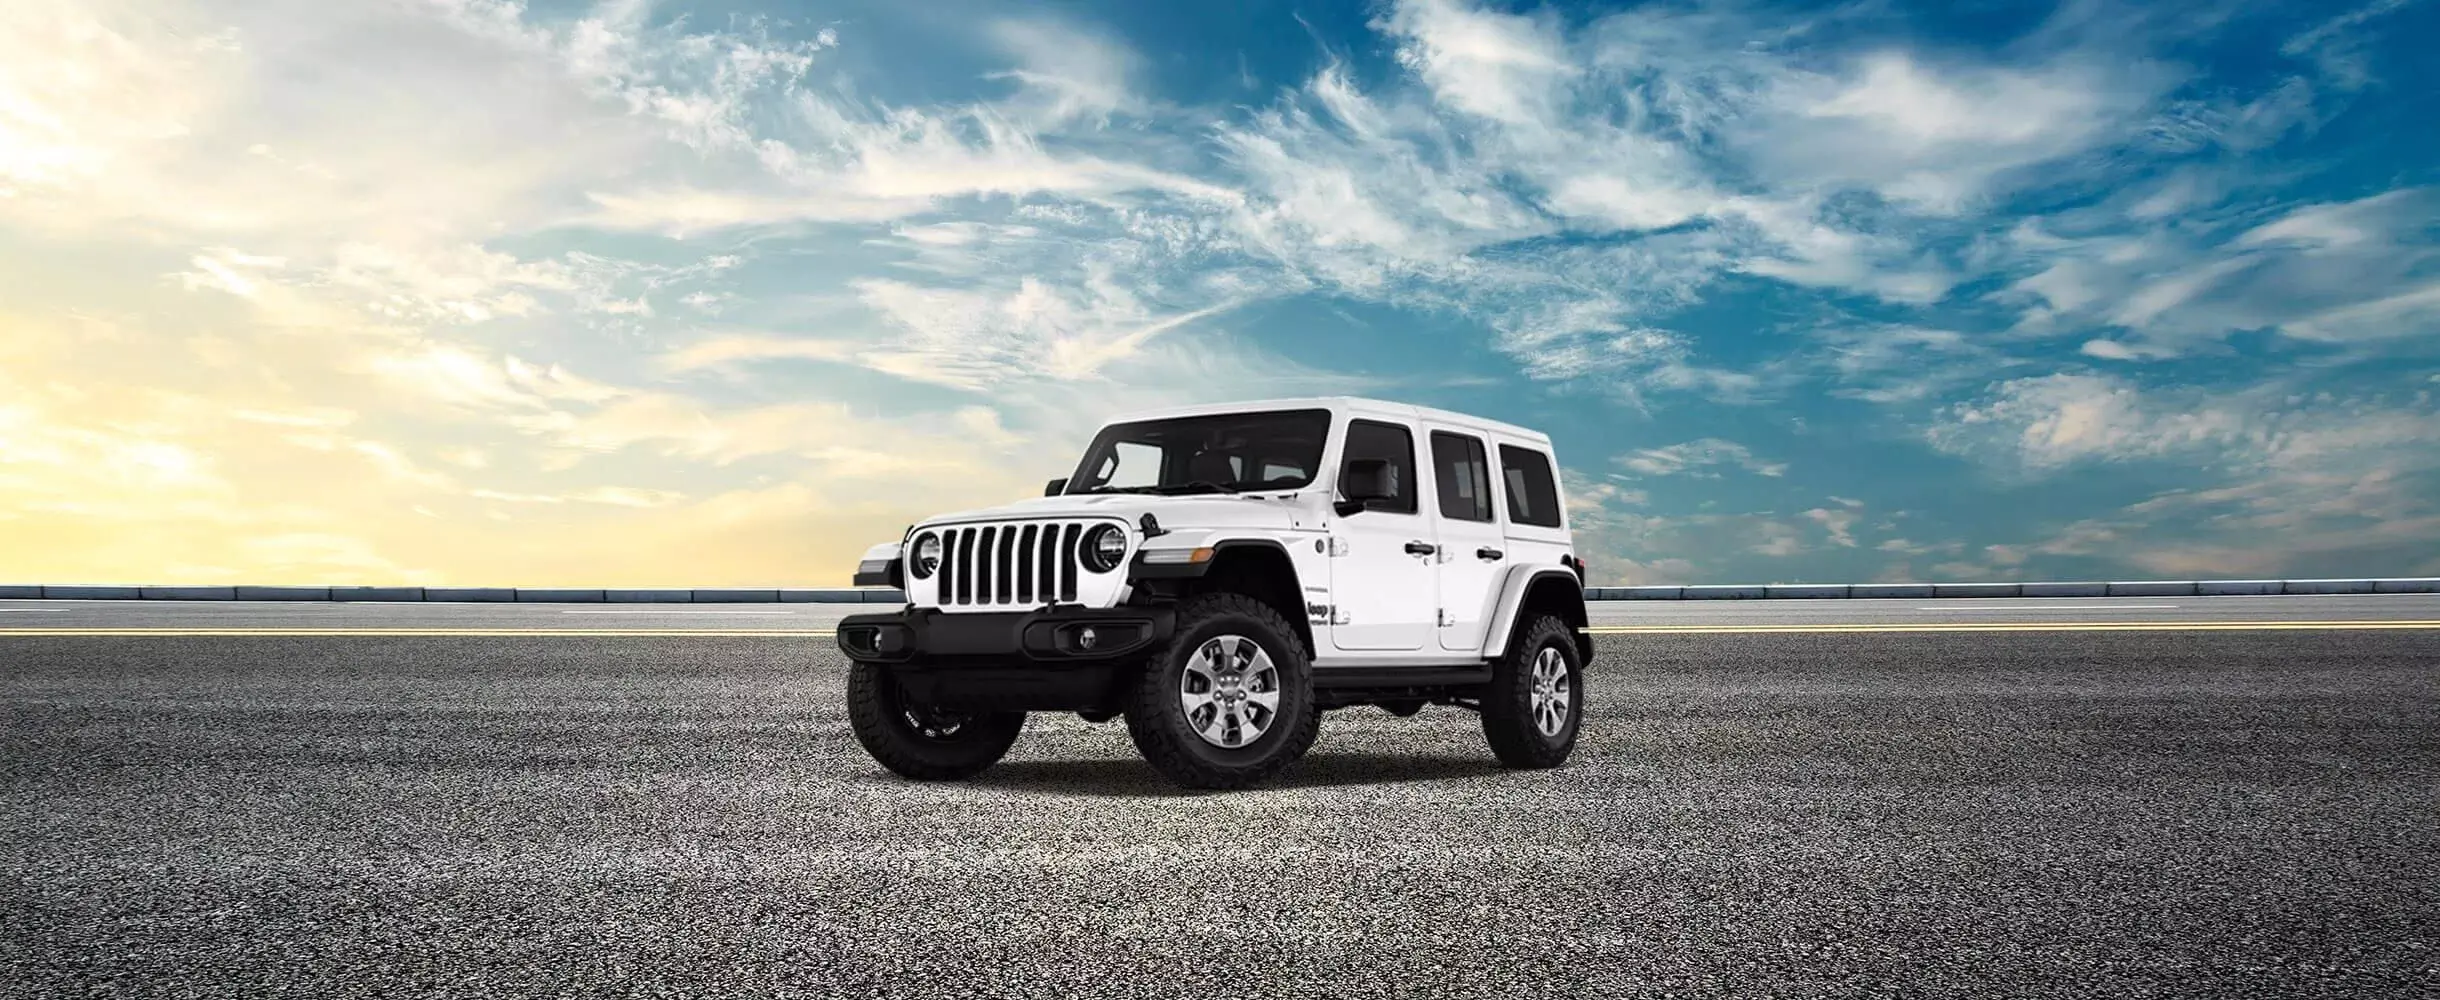 Rent a Jeep Wrangler in Fort Lauderdale | Avis Rent a Car